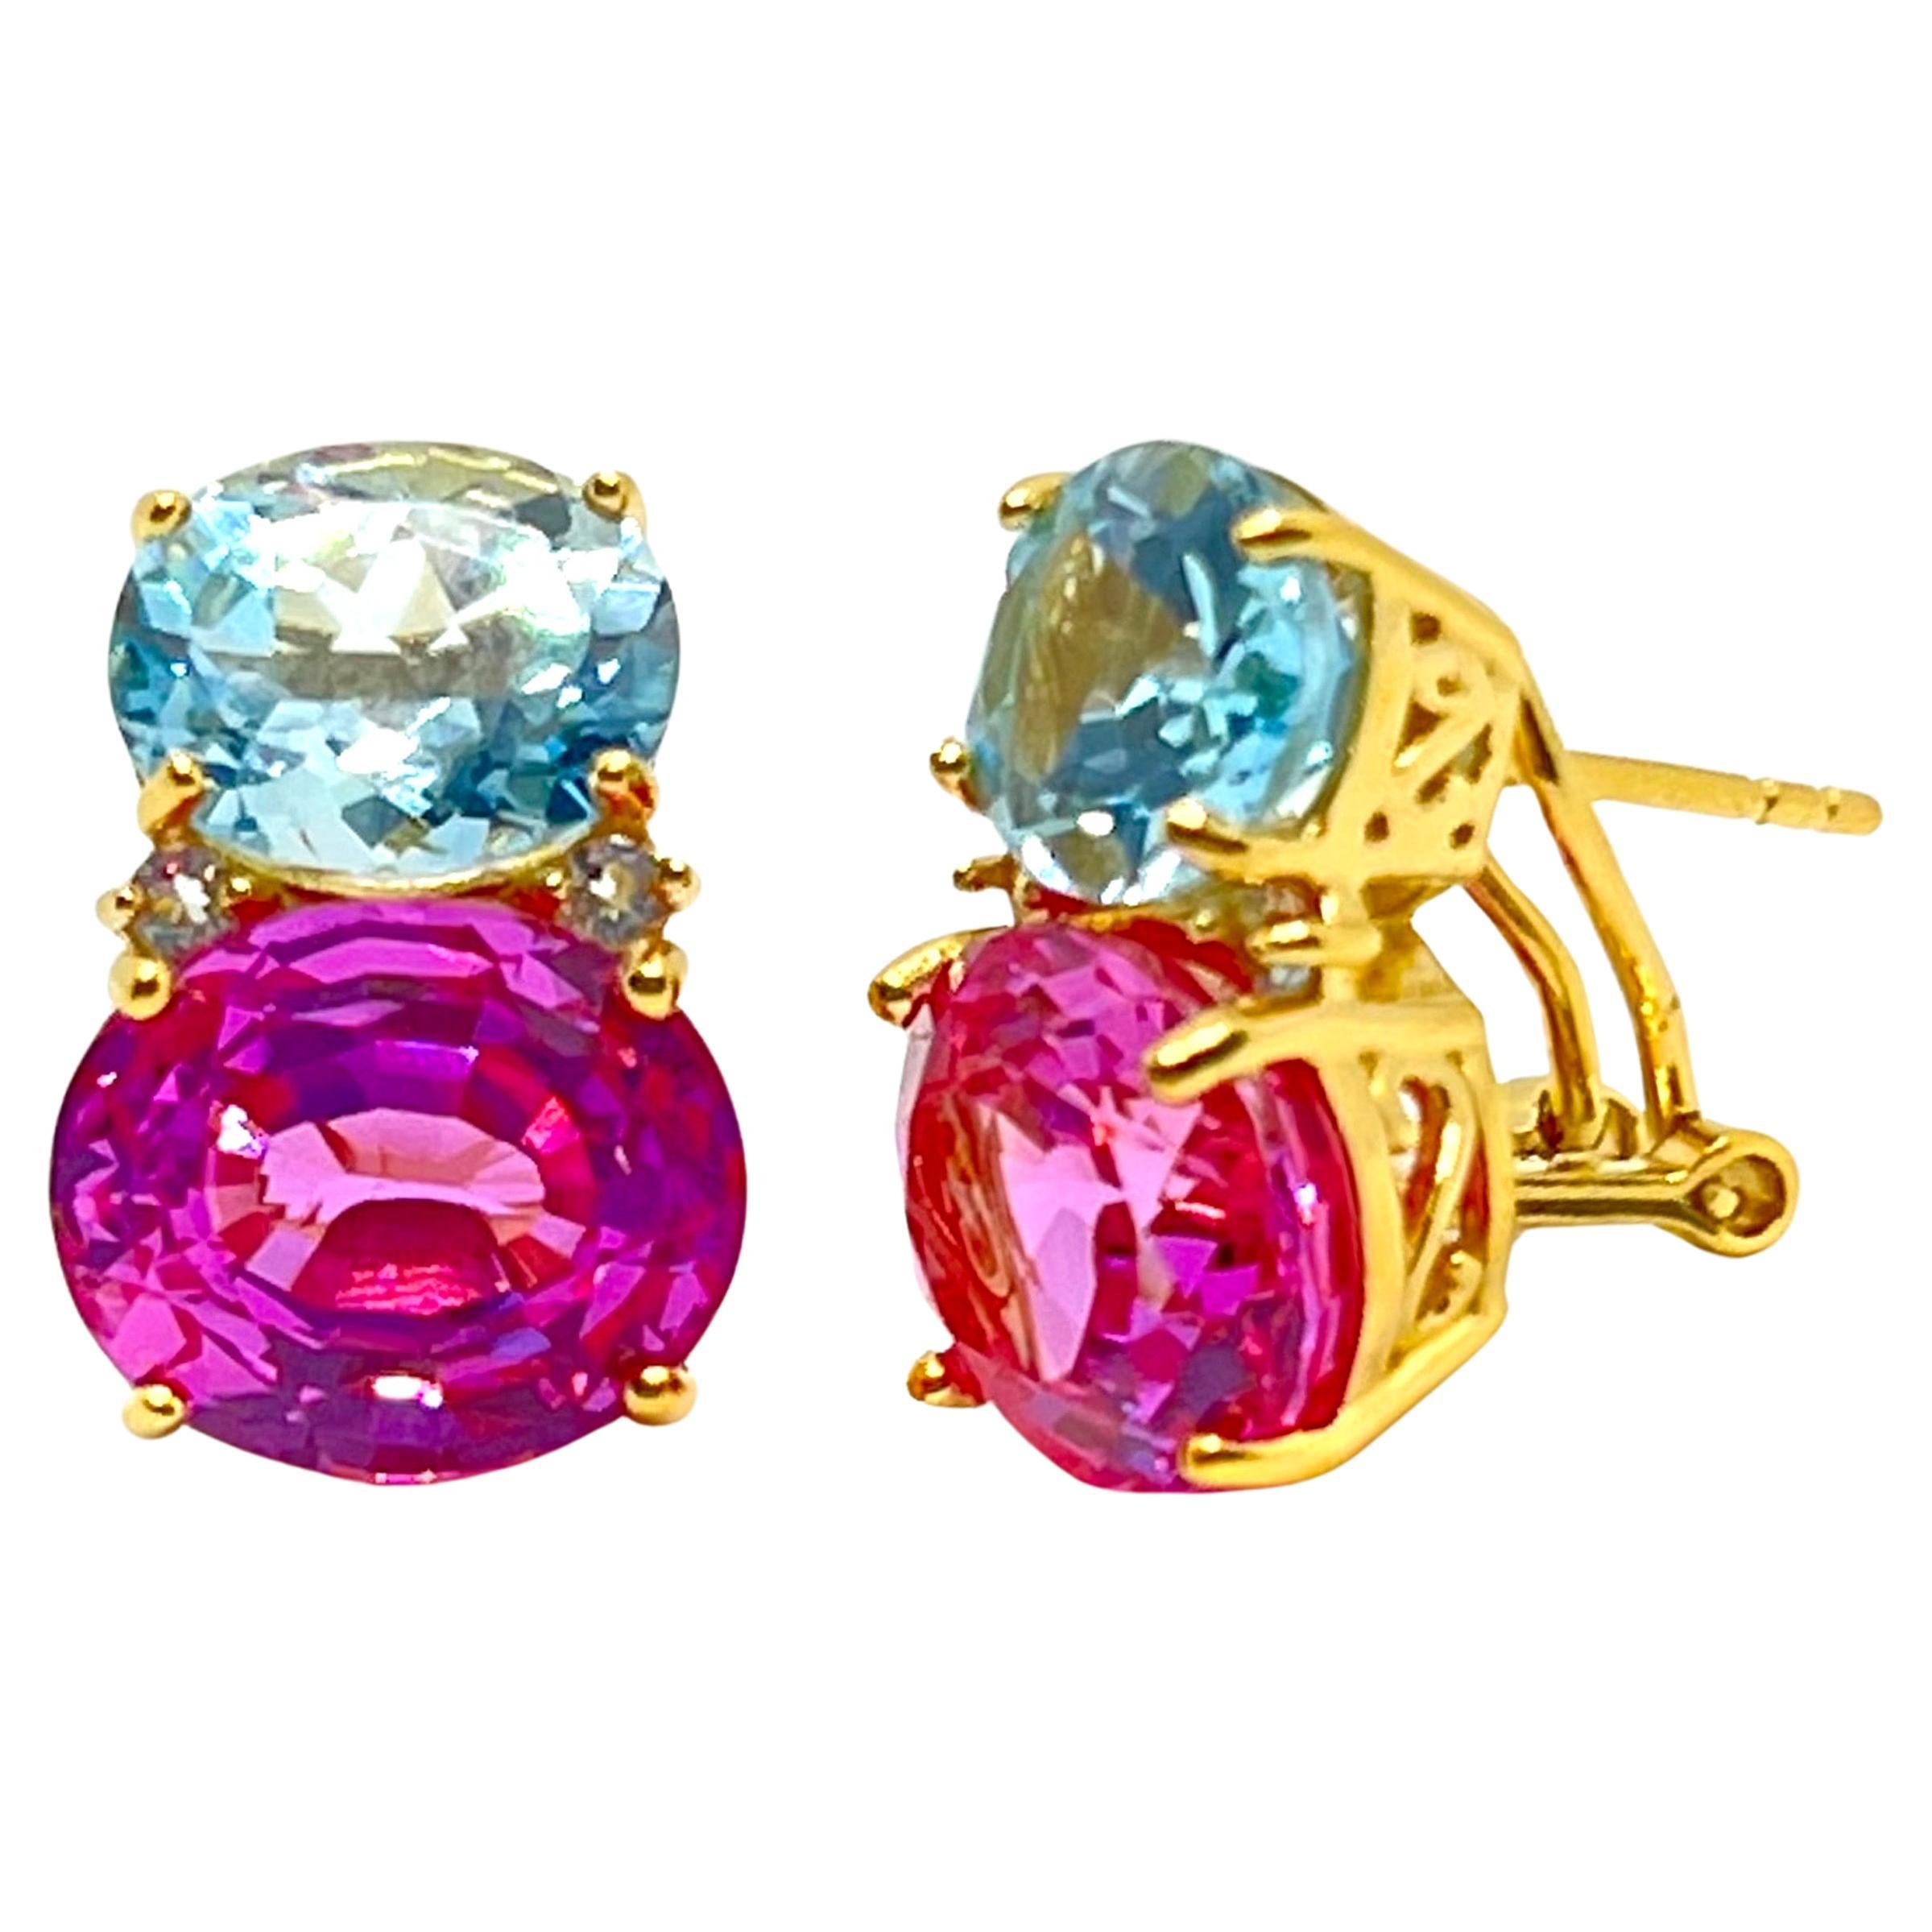 Stunning Double Oval Blue Topaz & Pink Sapphire Earrings For Sale